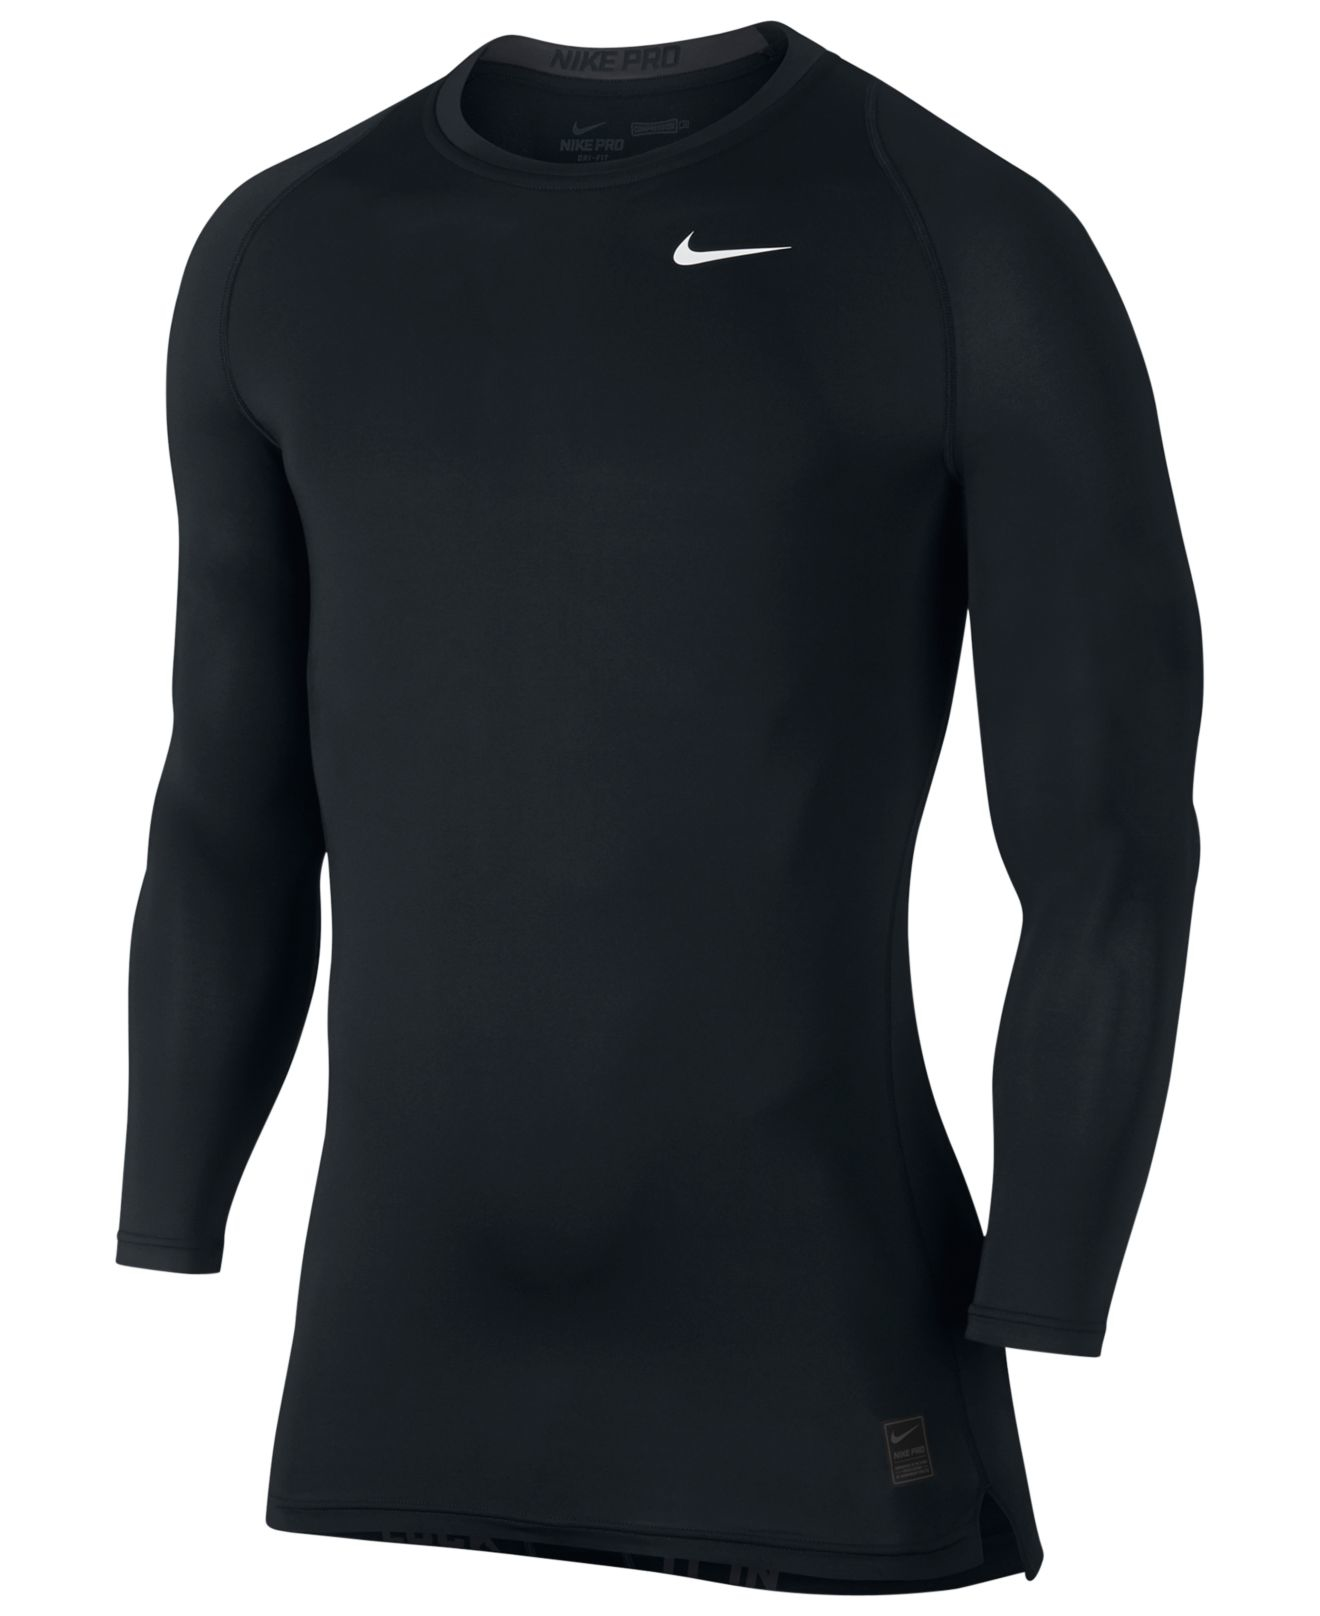 Nike Cool Compression Shirt in Black/White (Black) for Men - Lyst